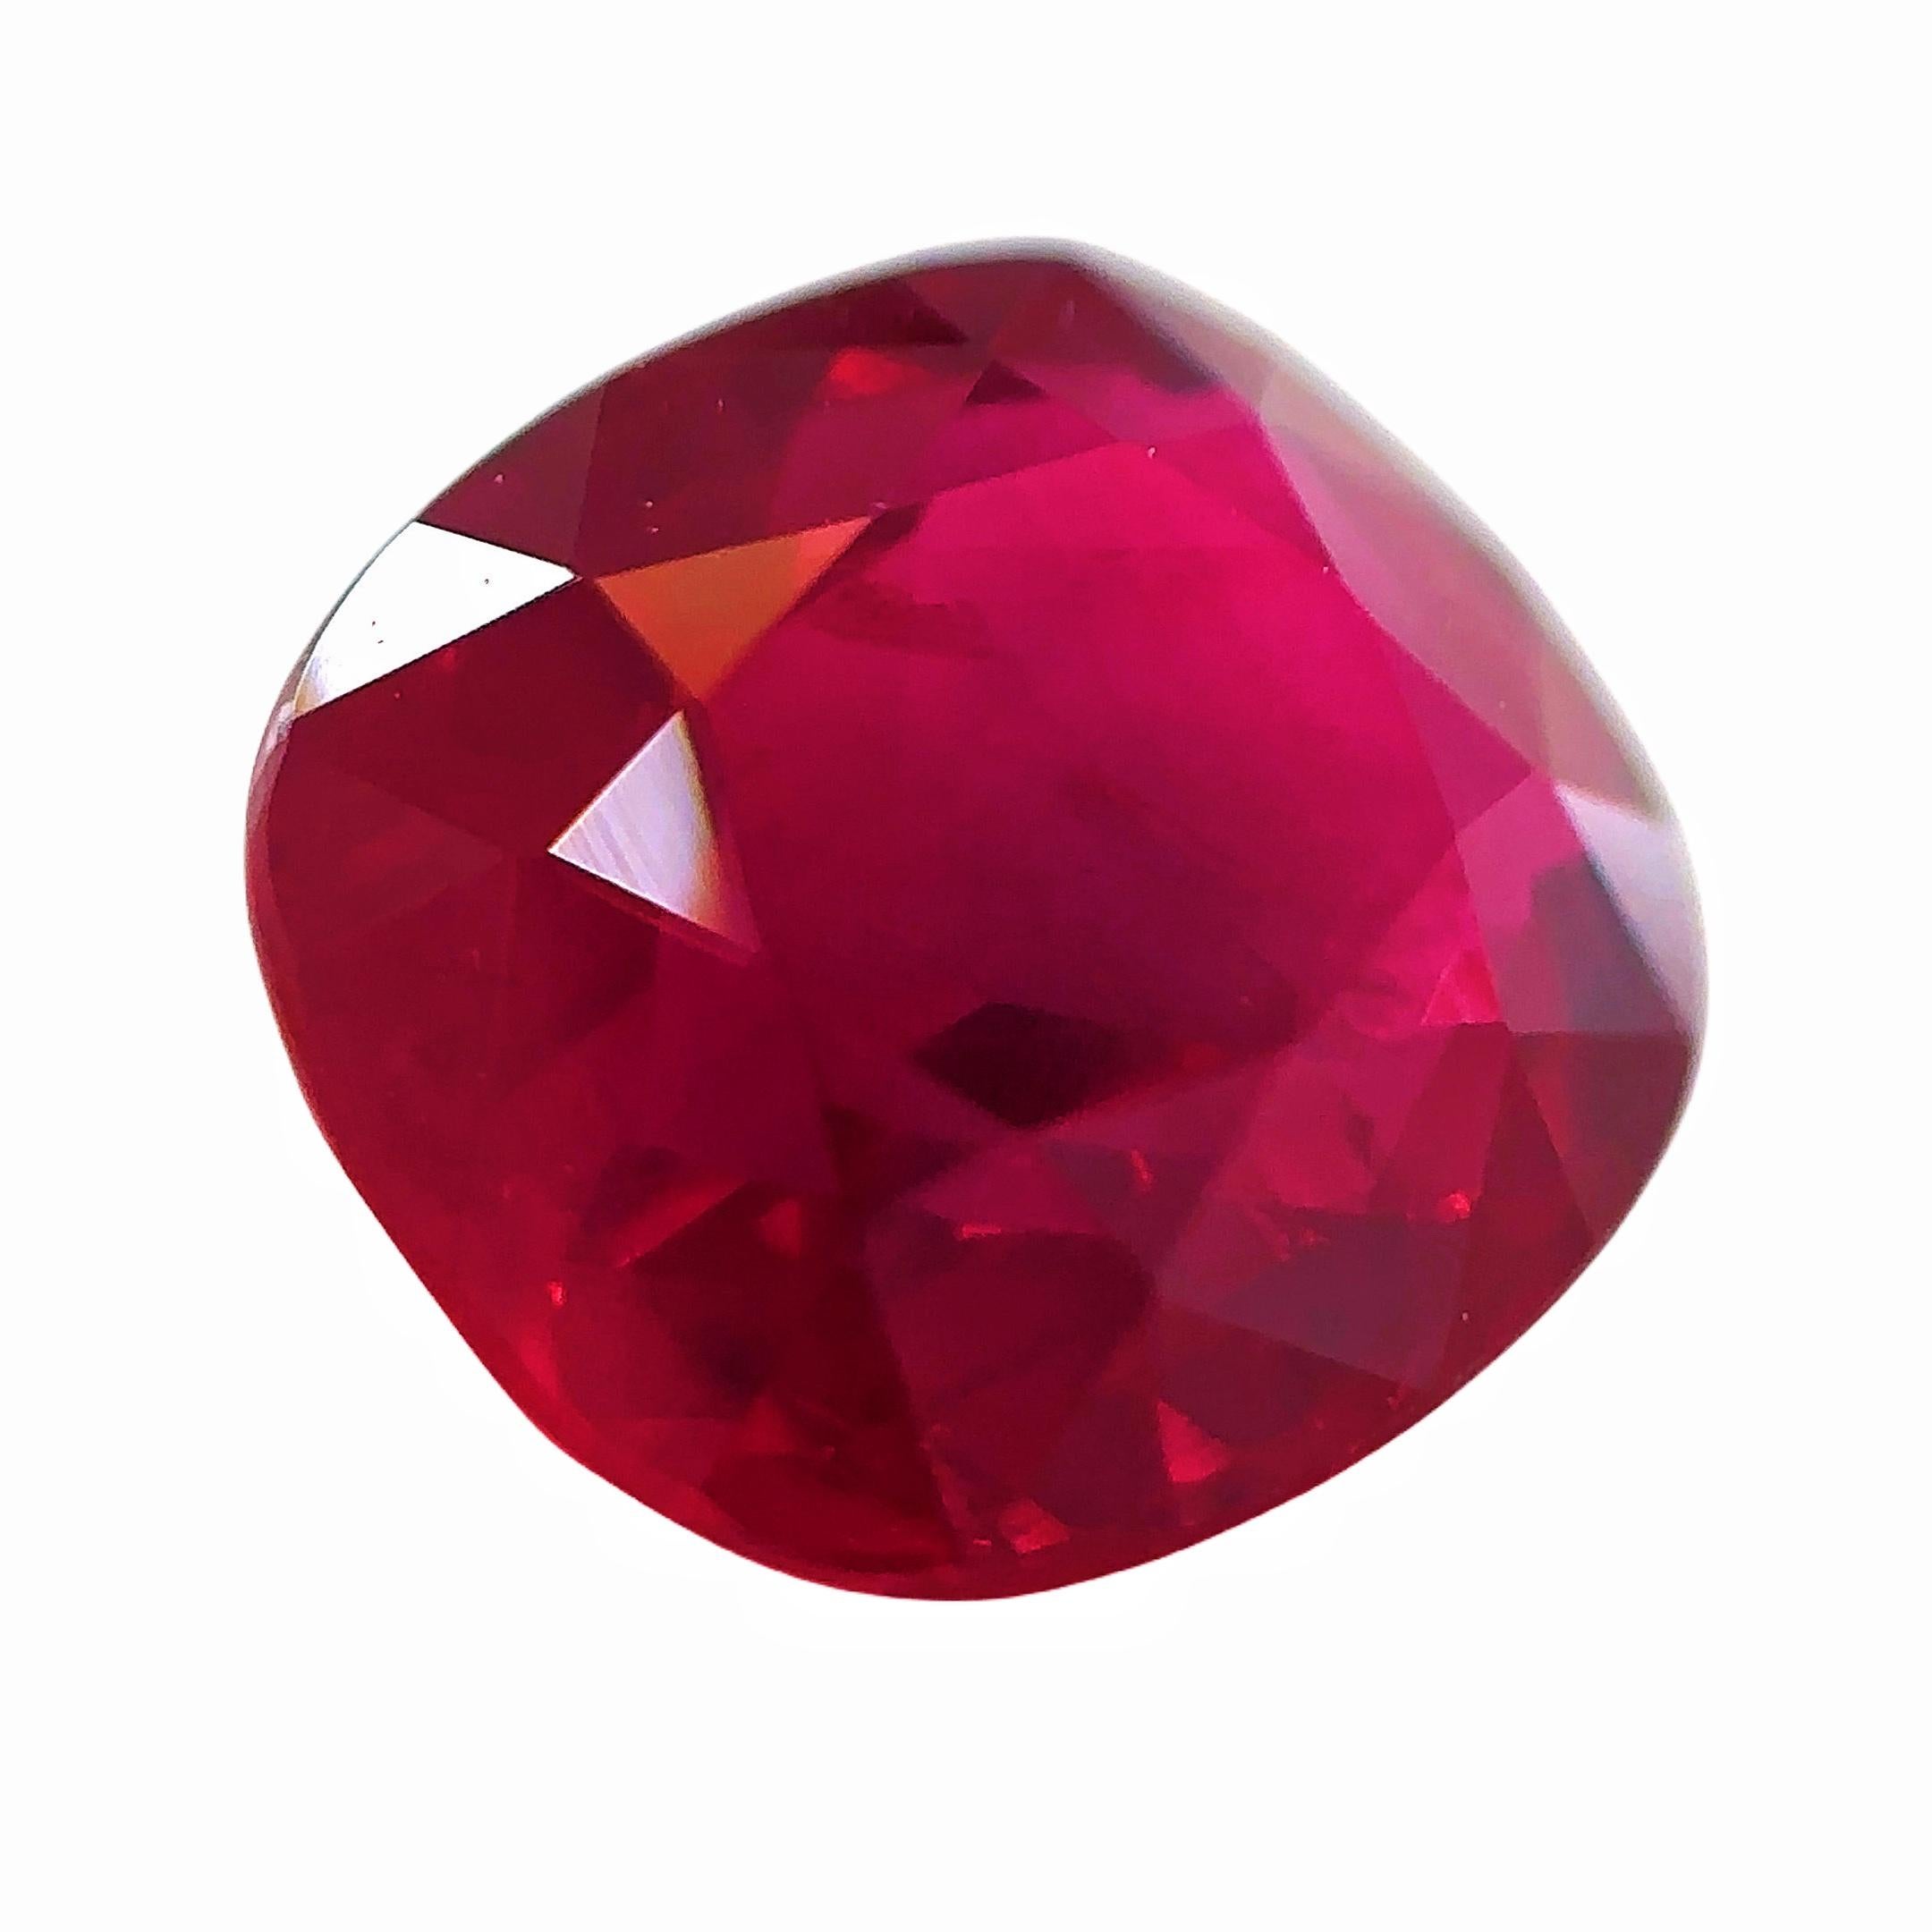 GRS Certified Pigeon Blood 3.02 Carat Natural Unheated Mozambique Ruby

This Item is ideal for your design as an engagement ring, cocktail ring, necklace, bracelet, etc.

Come with a GRS lab report.

ABOUT US 

Xuelai Jewellery London is a